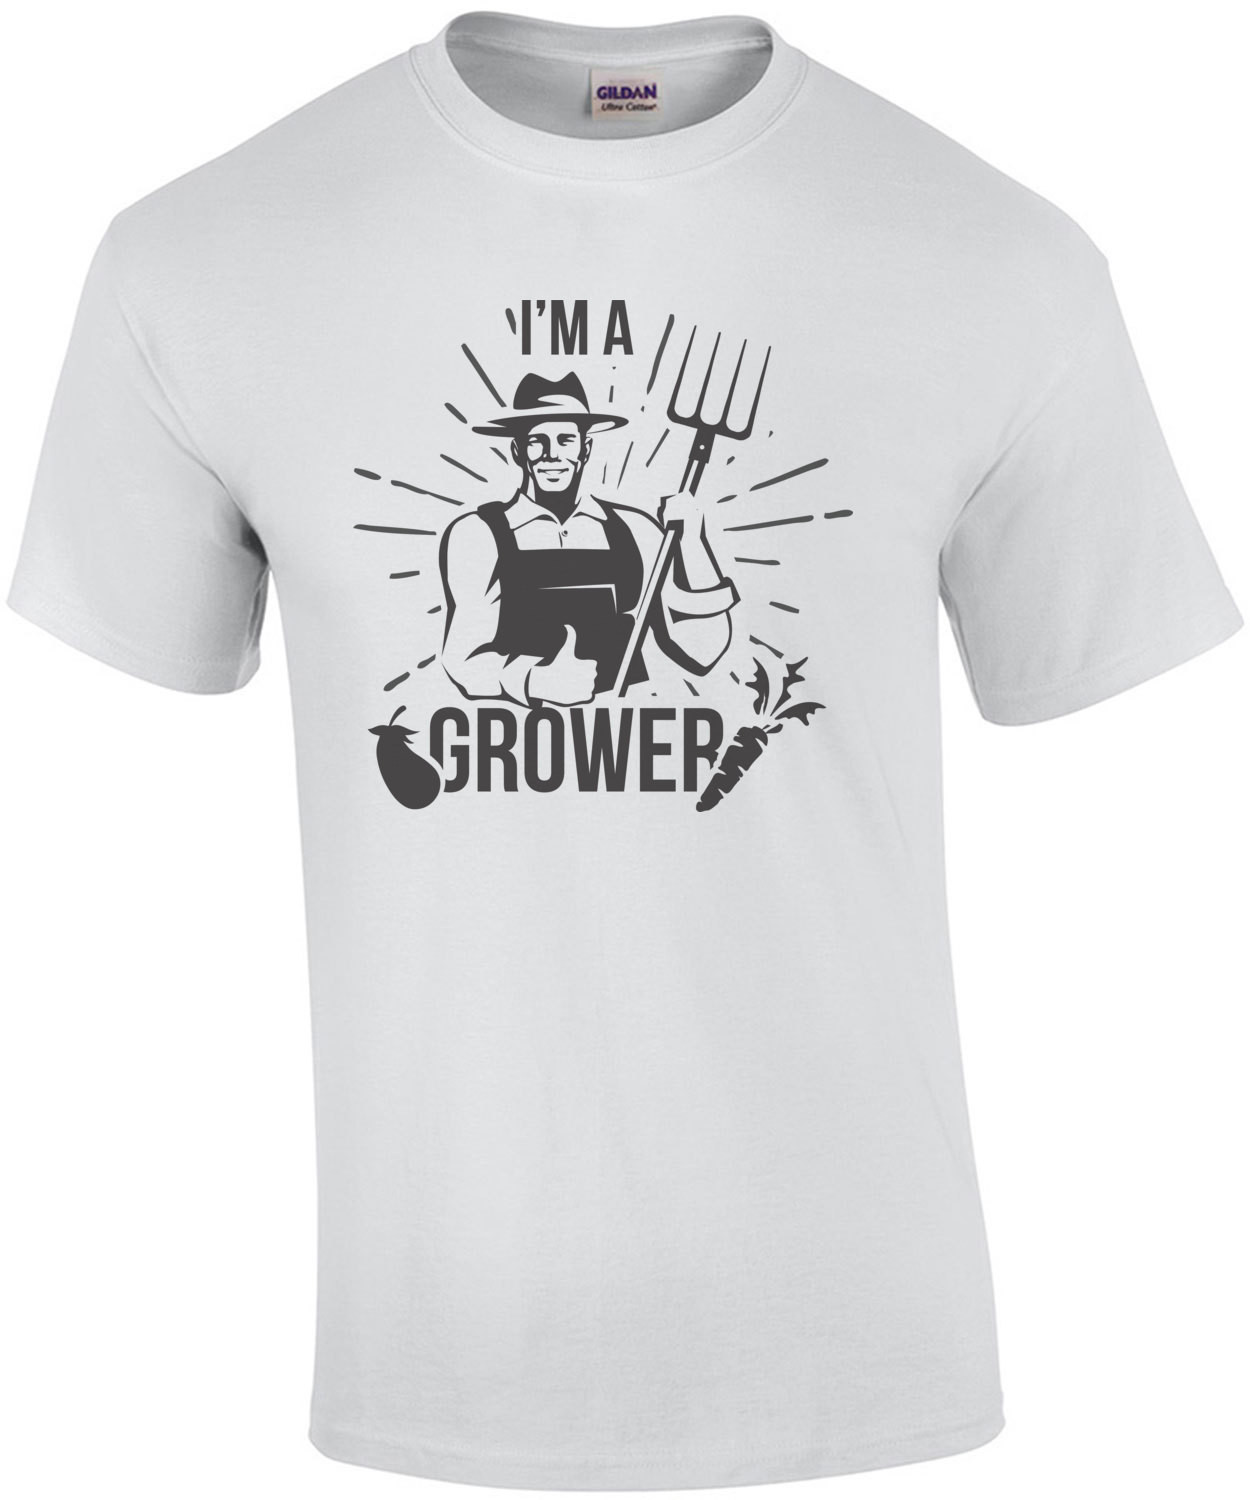 I'm a grower - funny sexual t-shirt